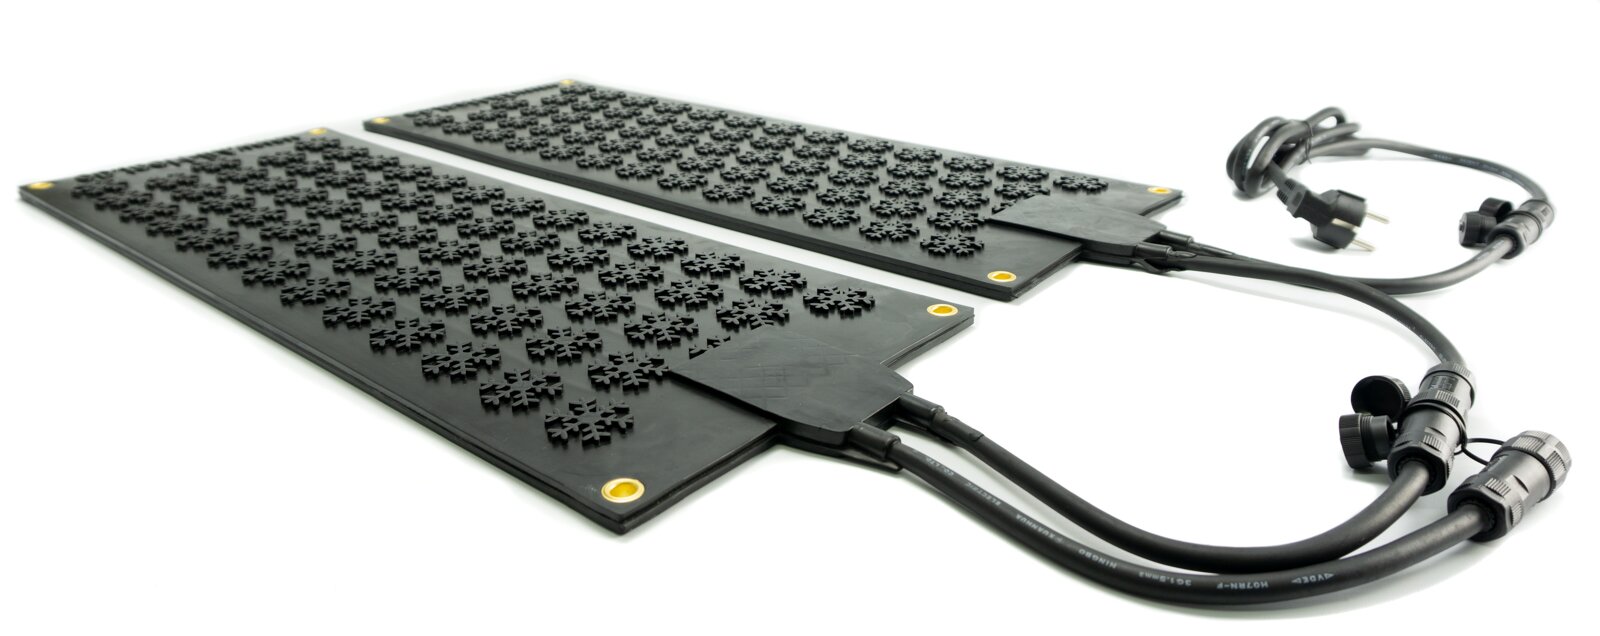 The Snow Melting Mats are easily attachable with waterproof plugs